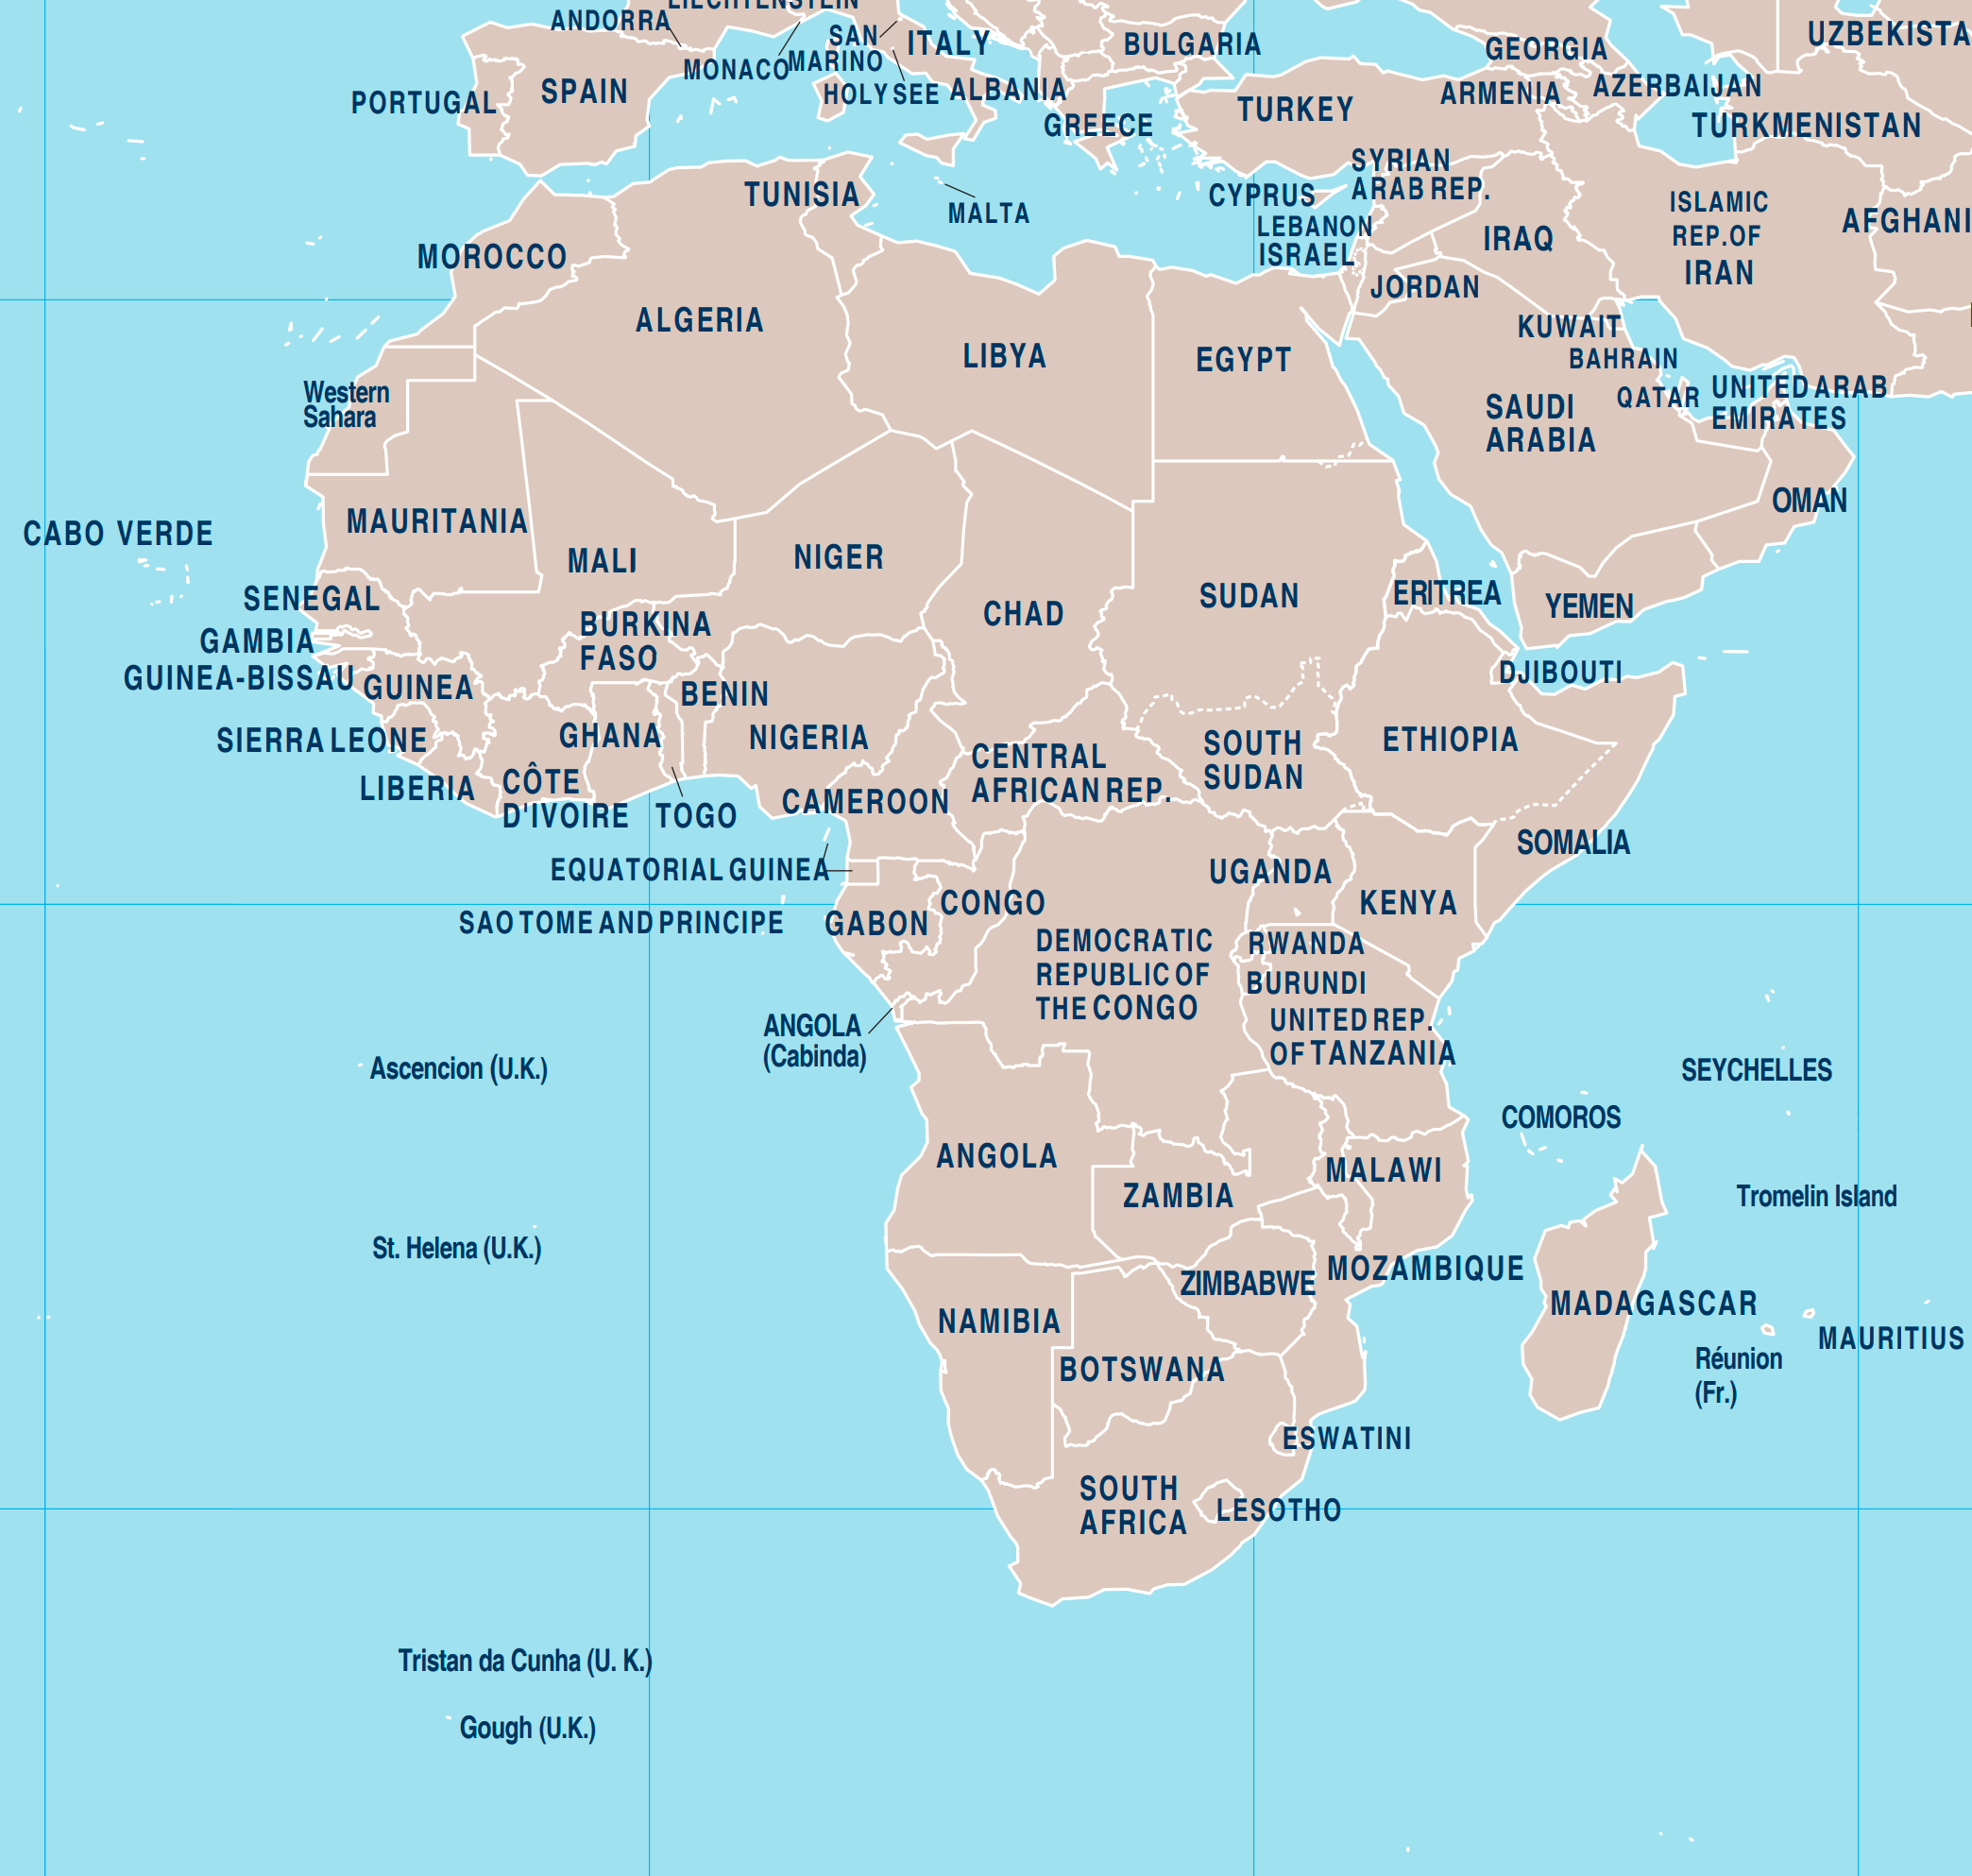 File:Africa-political-map.jpg - Wikimedia Commons